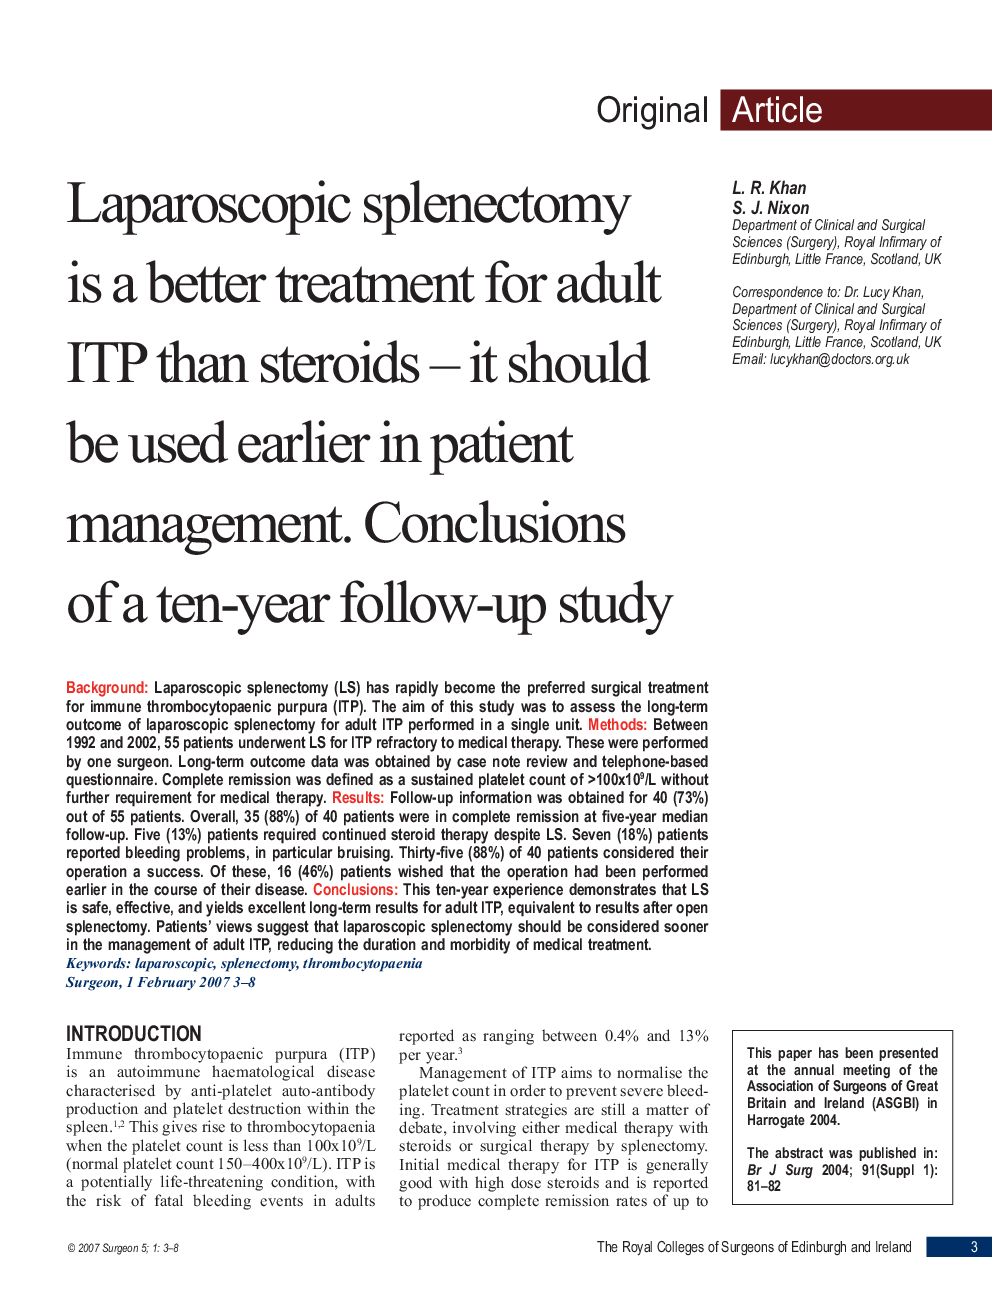 Laparoscopic splenectomy is a better treatment for adult ITP than steroids — it should be used earlier in patient management. Conclusions of a ten-year follow-up study